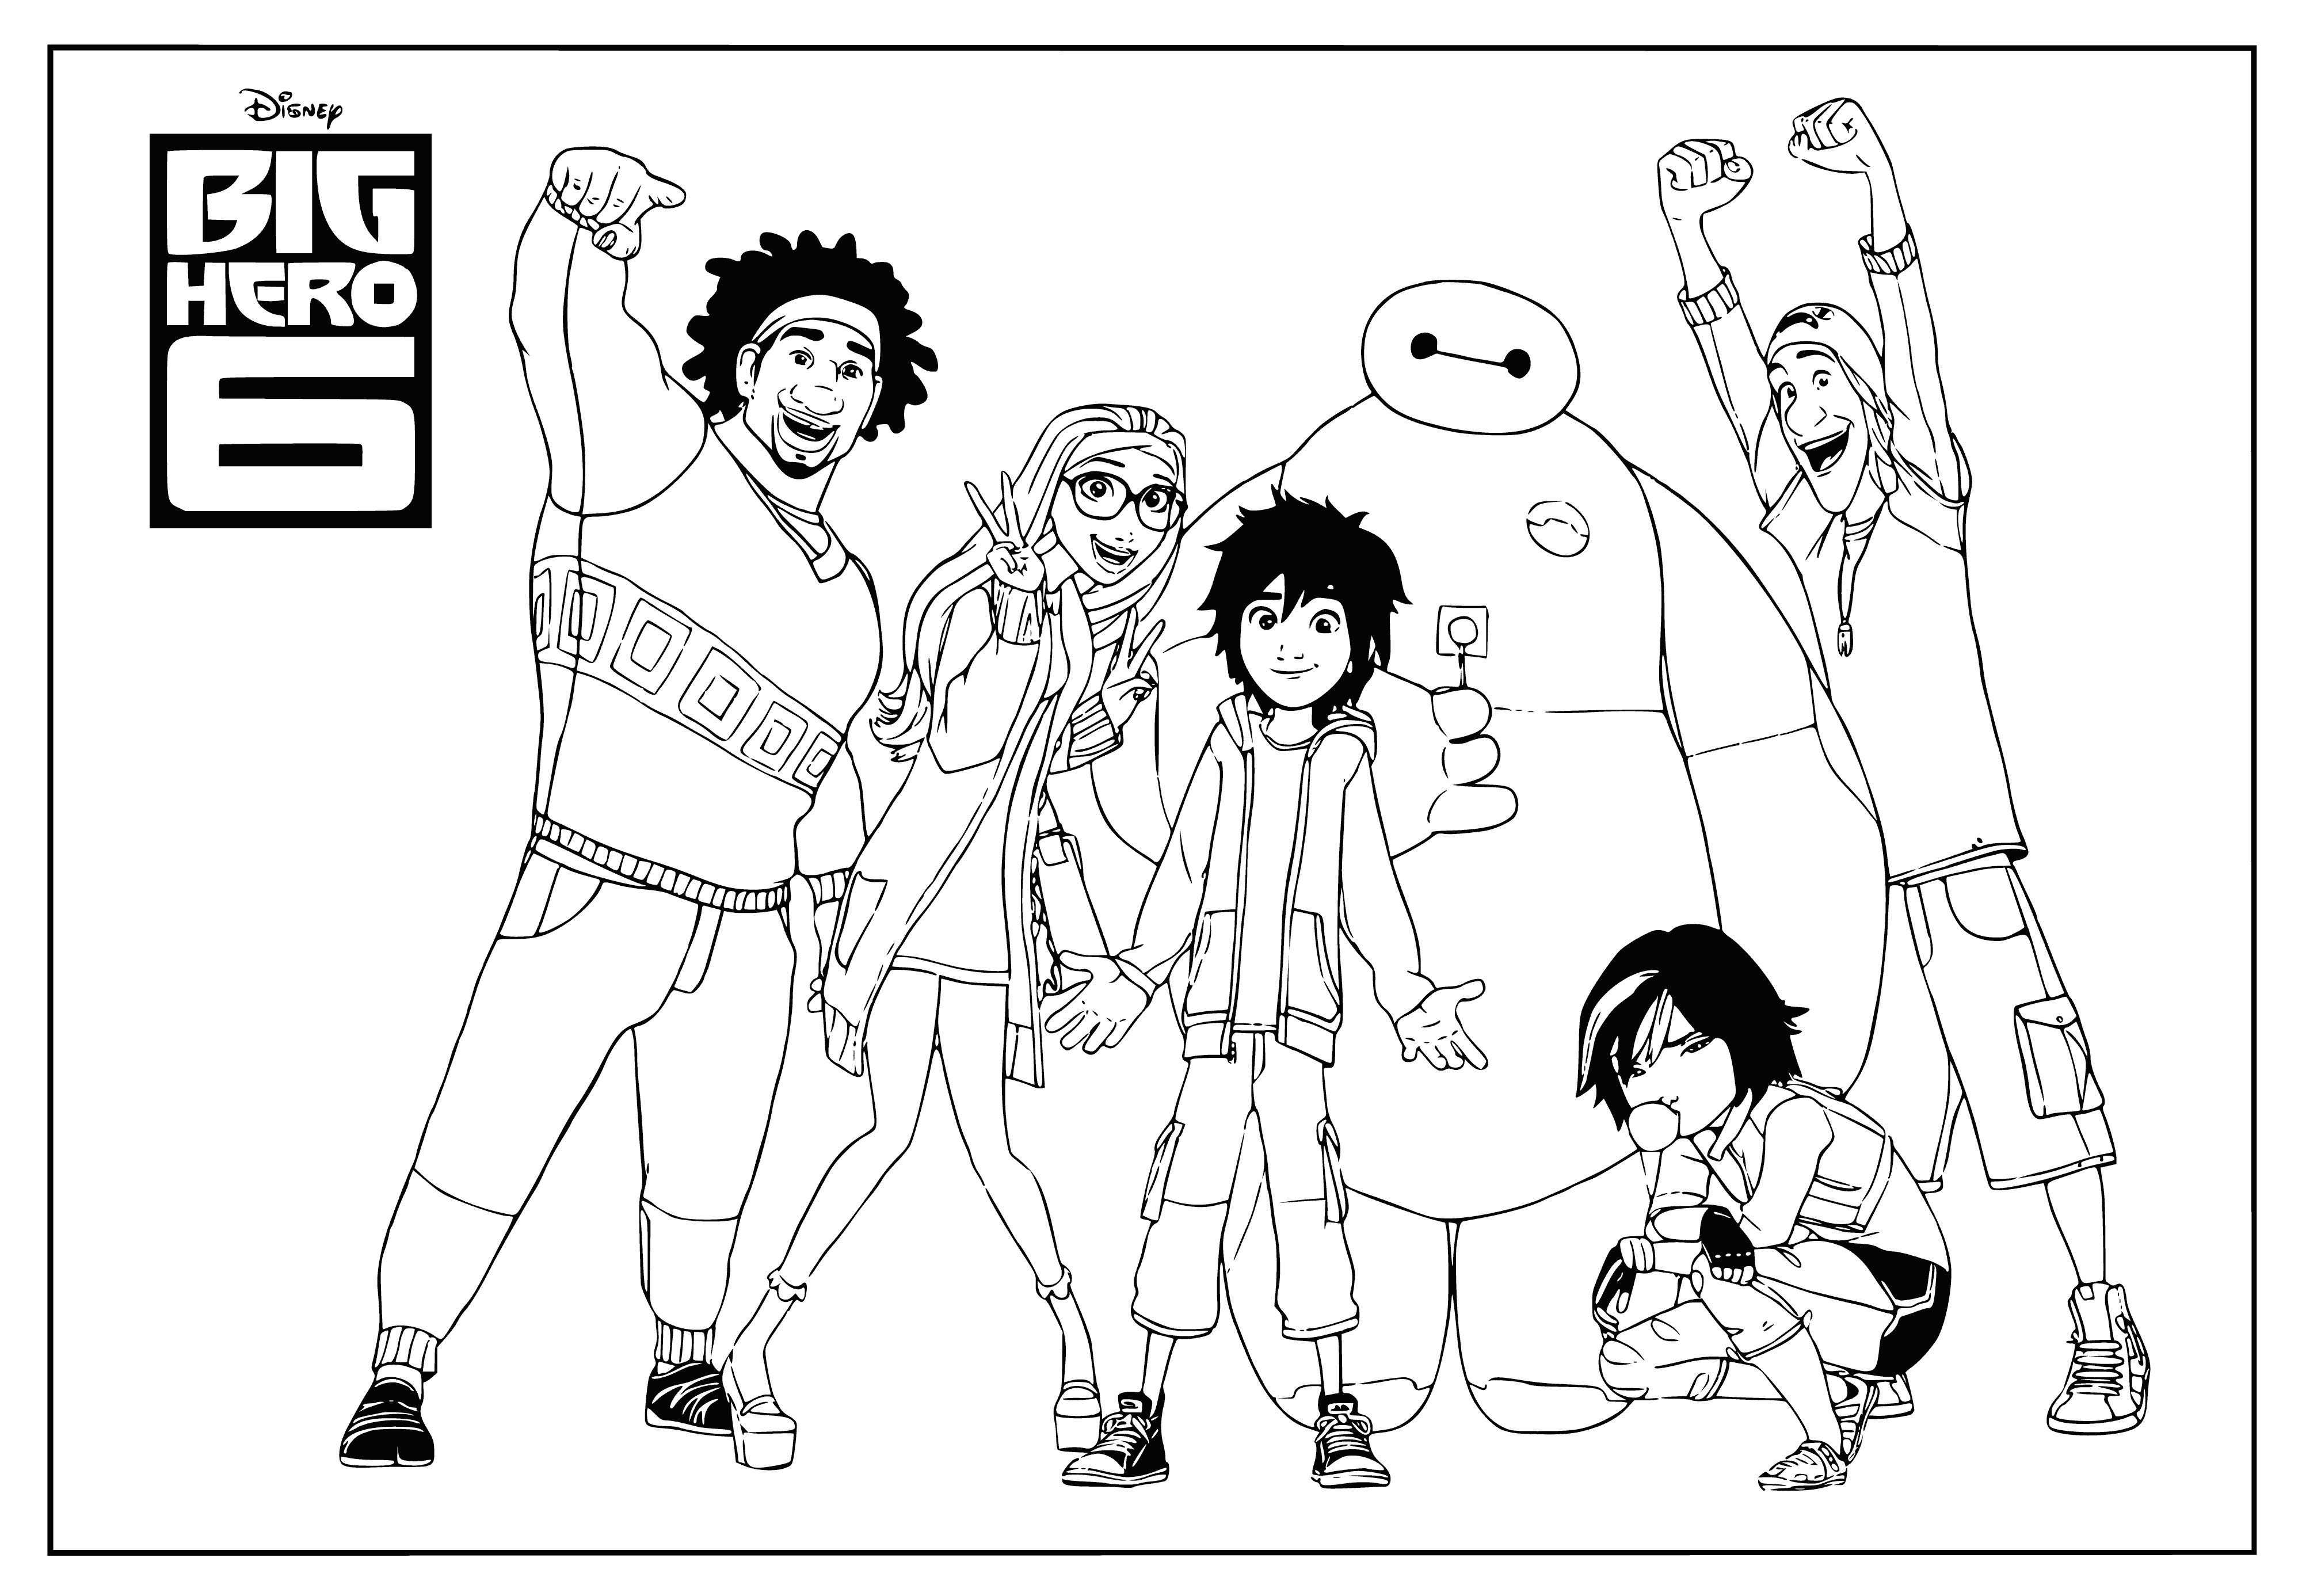 Team of heroes coloring page